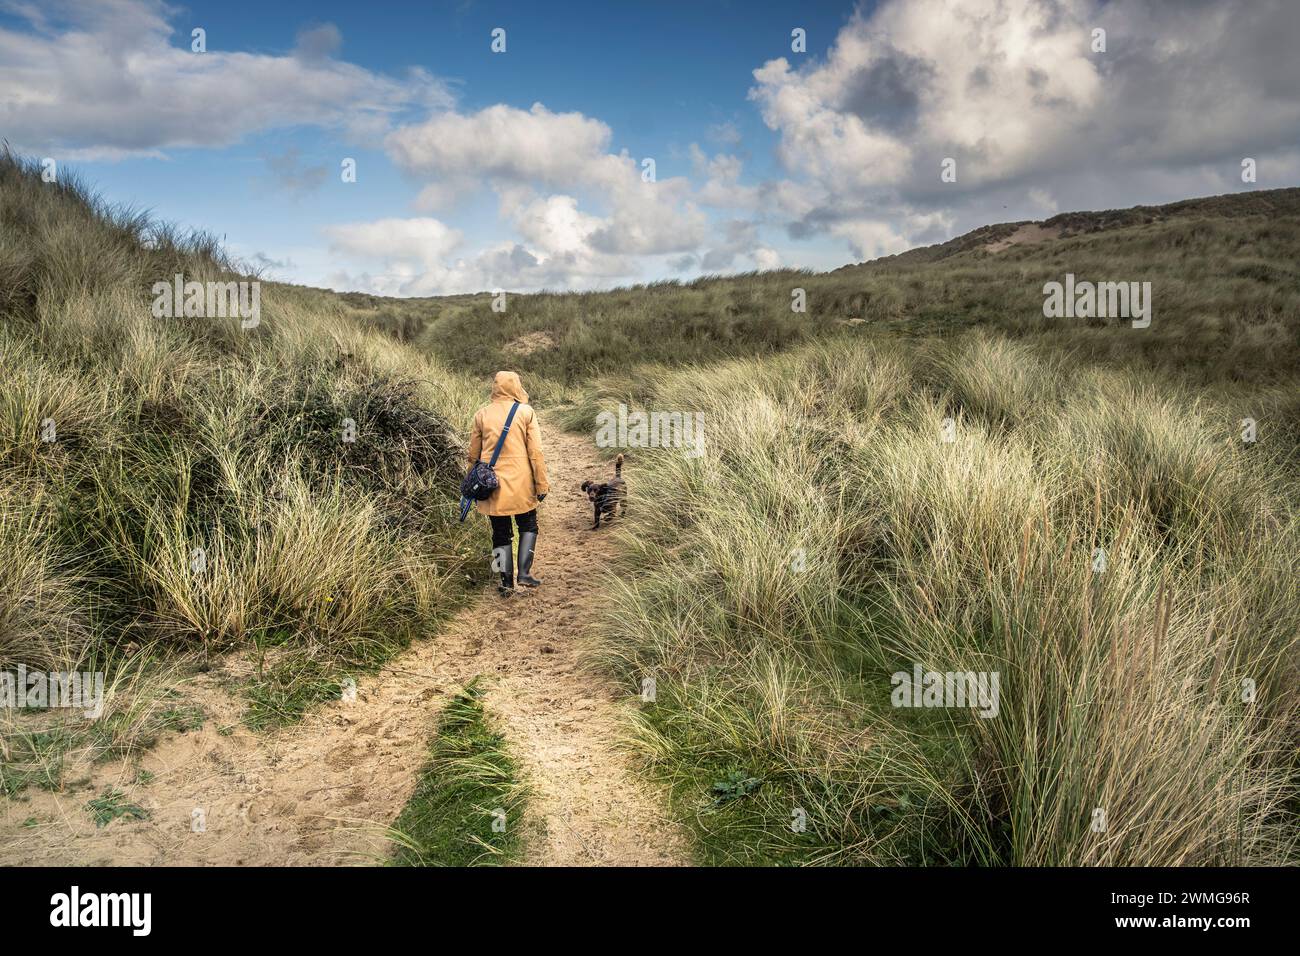 A dog walker walking a dog along a sandy footpath through the massive Sand dune system at Holywell Beach in Newquay in Cornwall in the UK.  The dune s Stock Photo